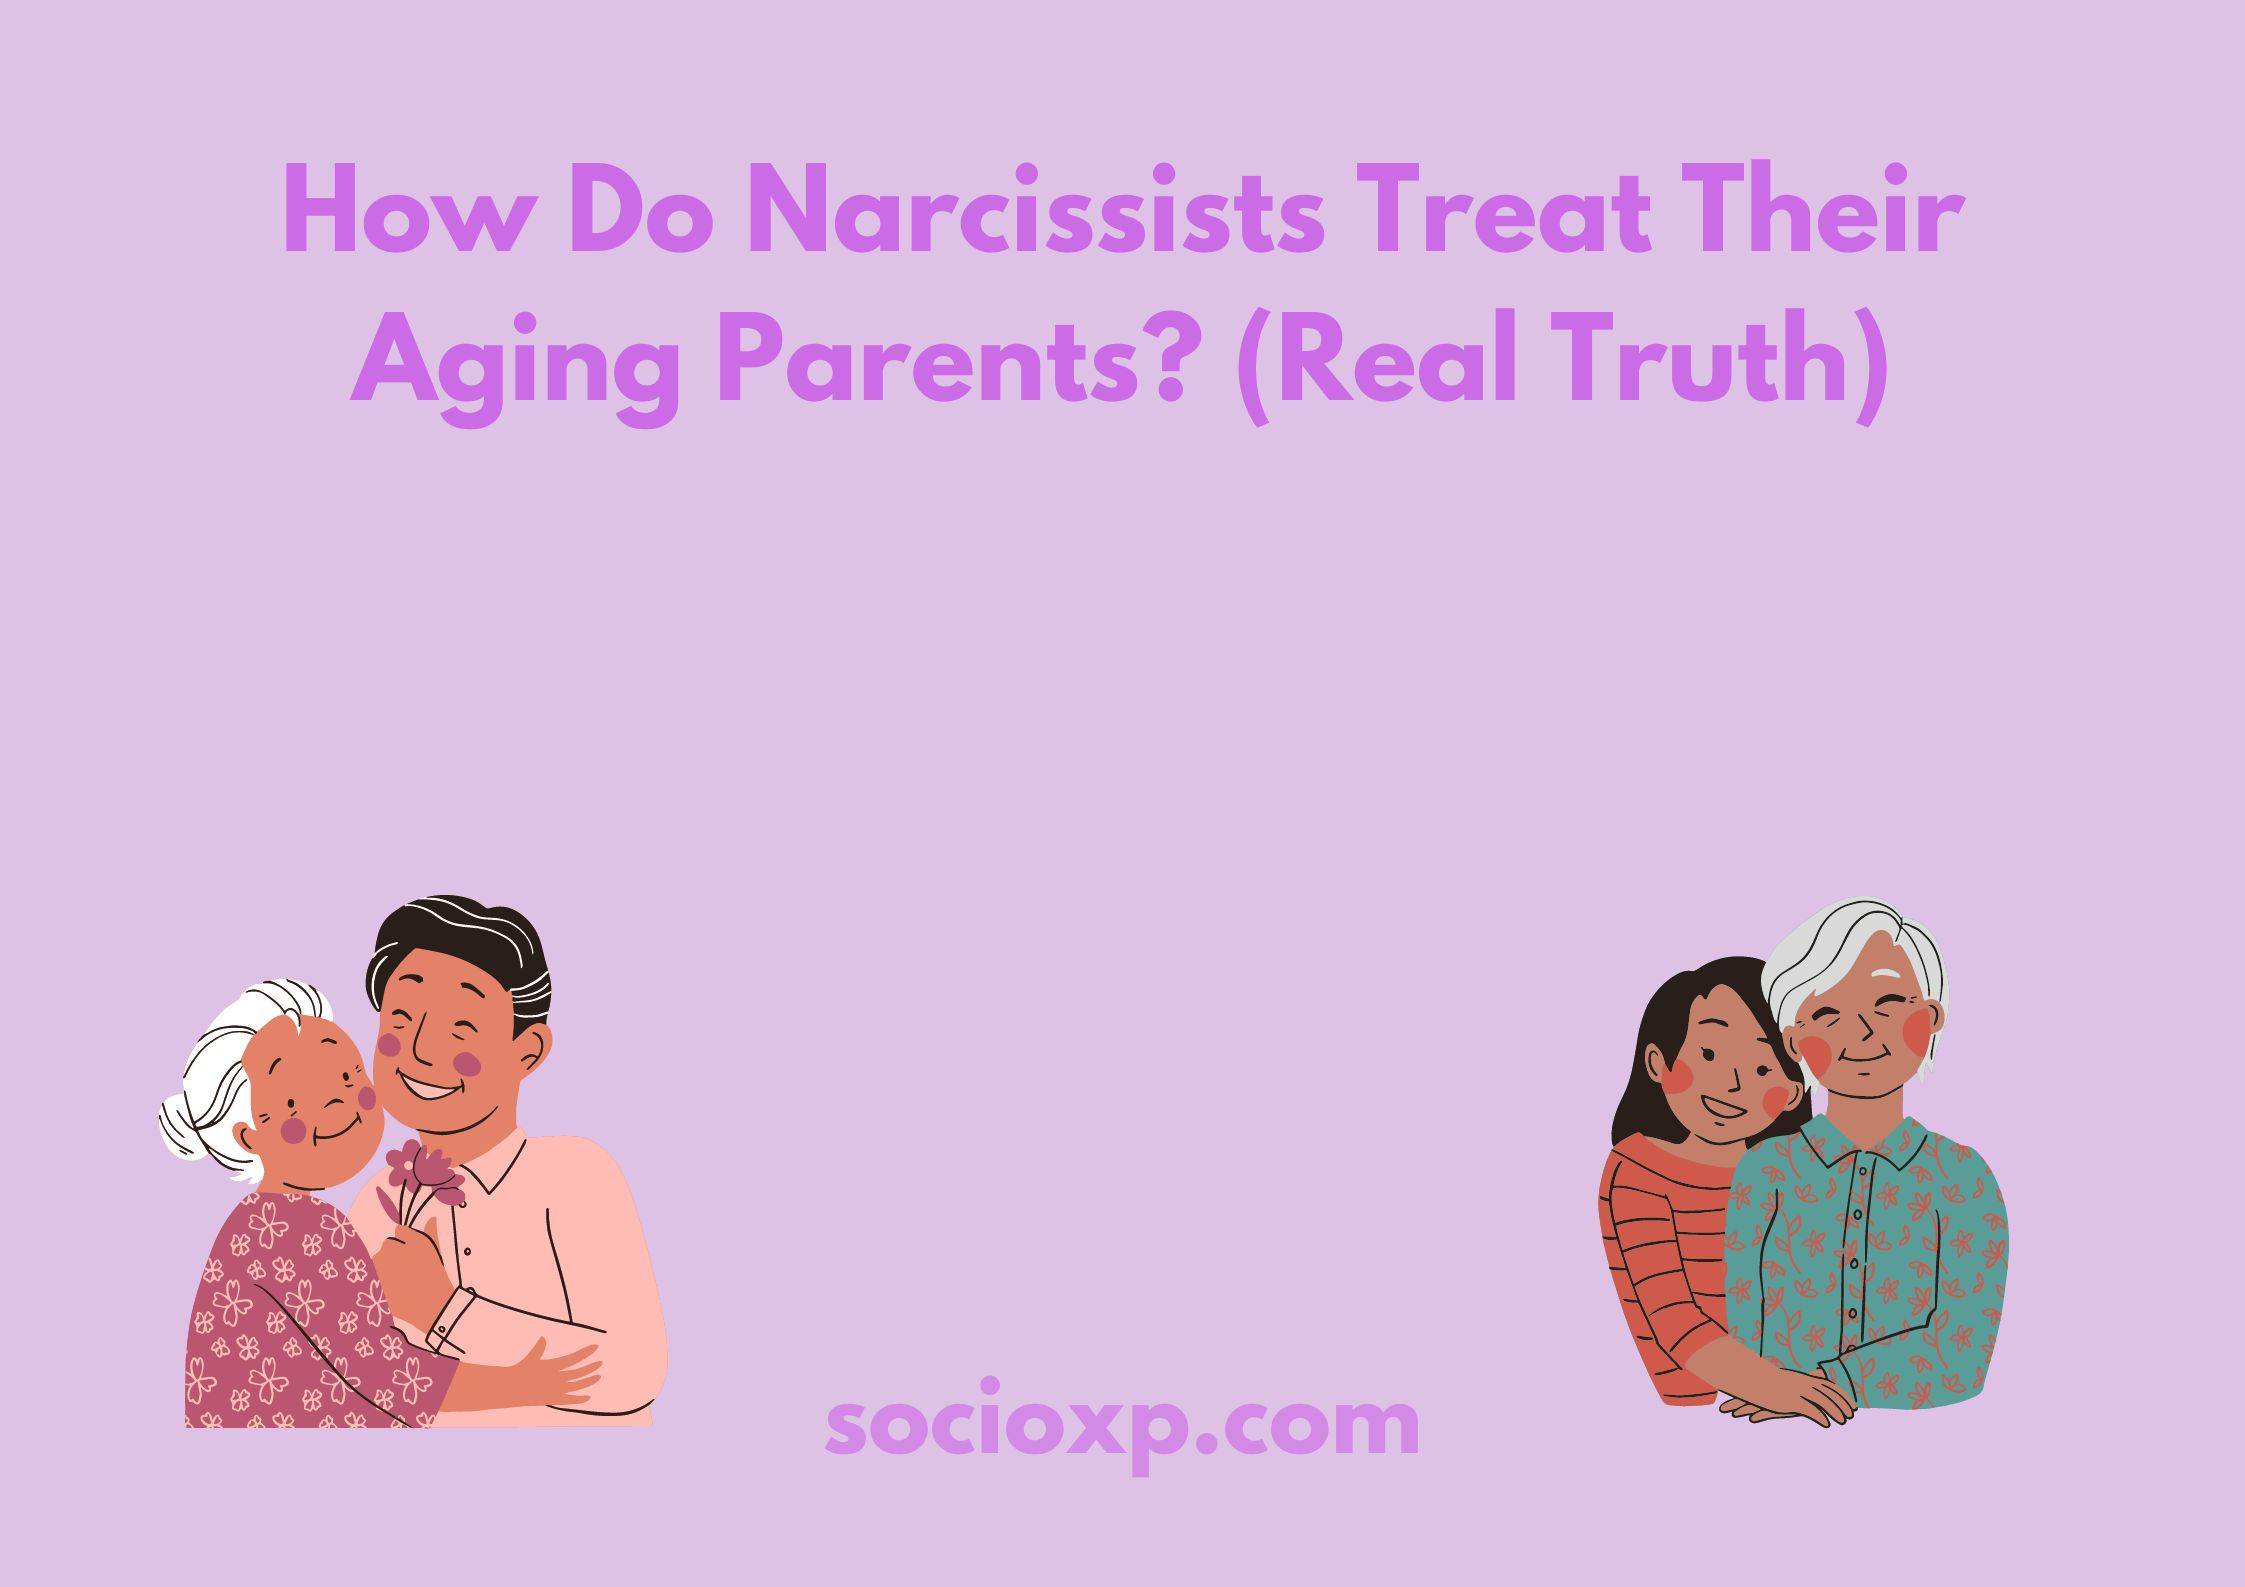 How Do Narcissists Treat Their Aging Parents? (Real Truth)